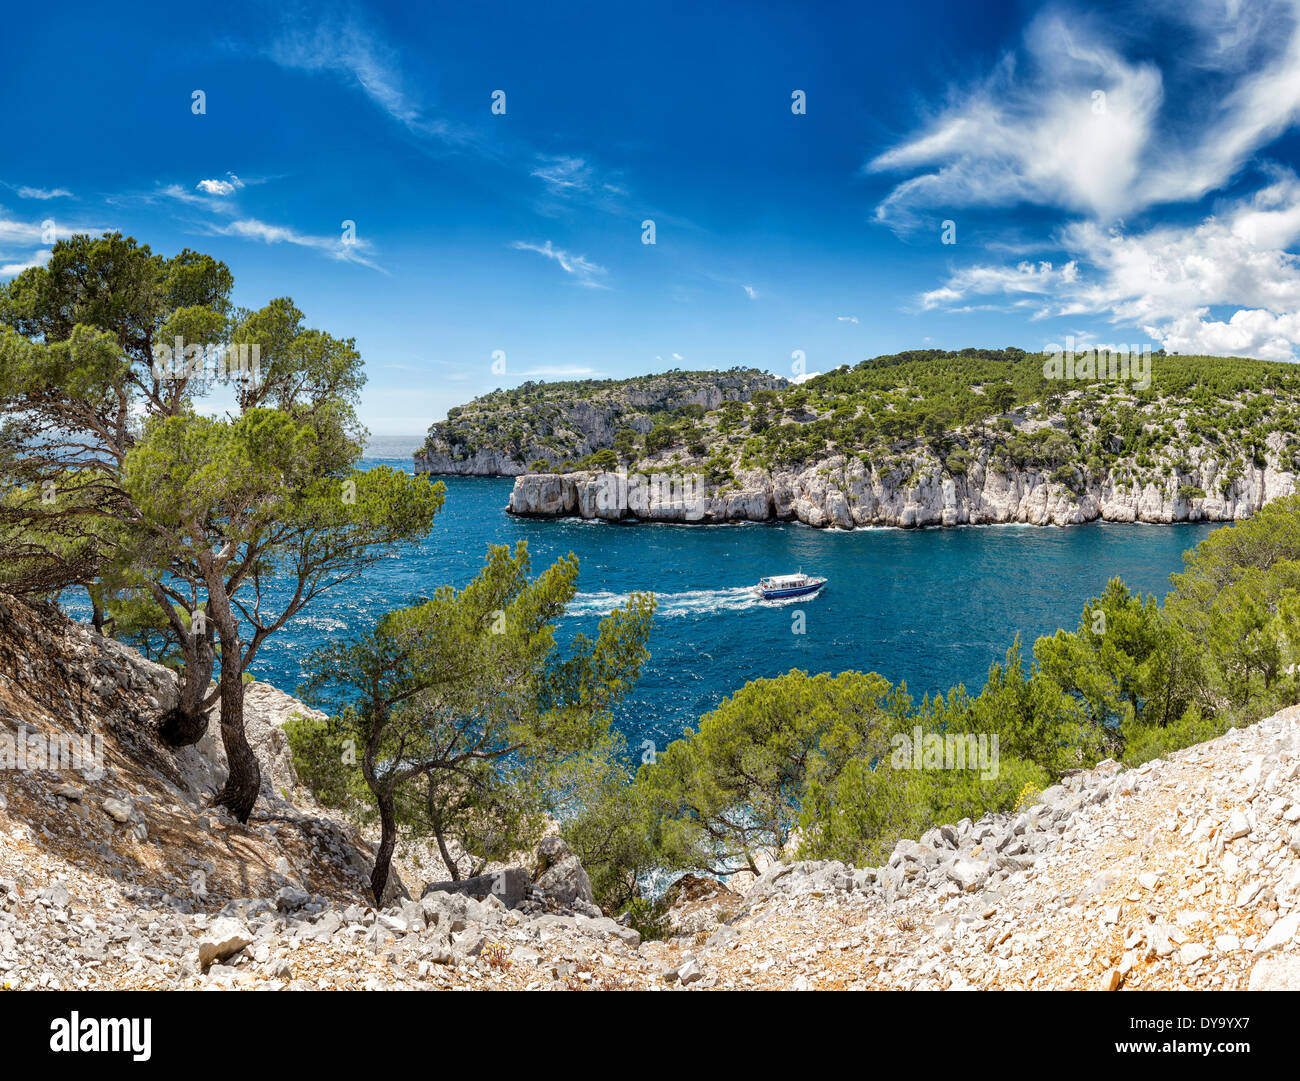 Calanque de Port Miou calanque rocky bay Mediterranean landscape water trees spring mountains sea ships boat Cassis Bouches d Stock Photo